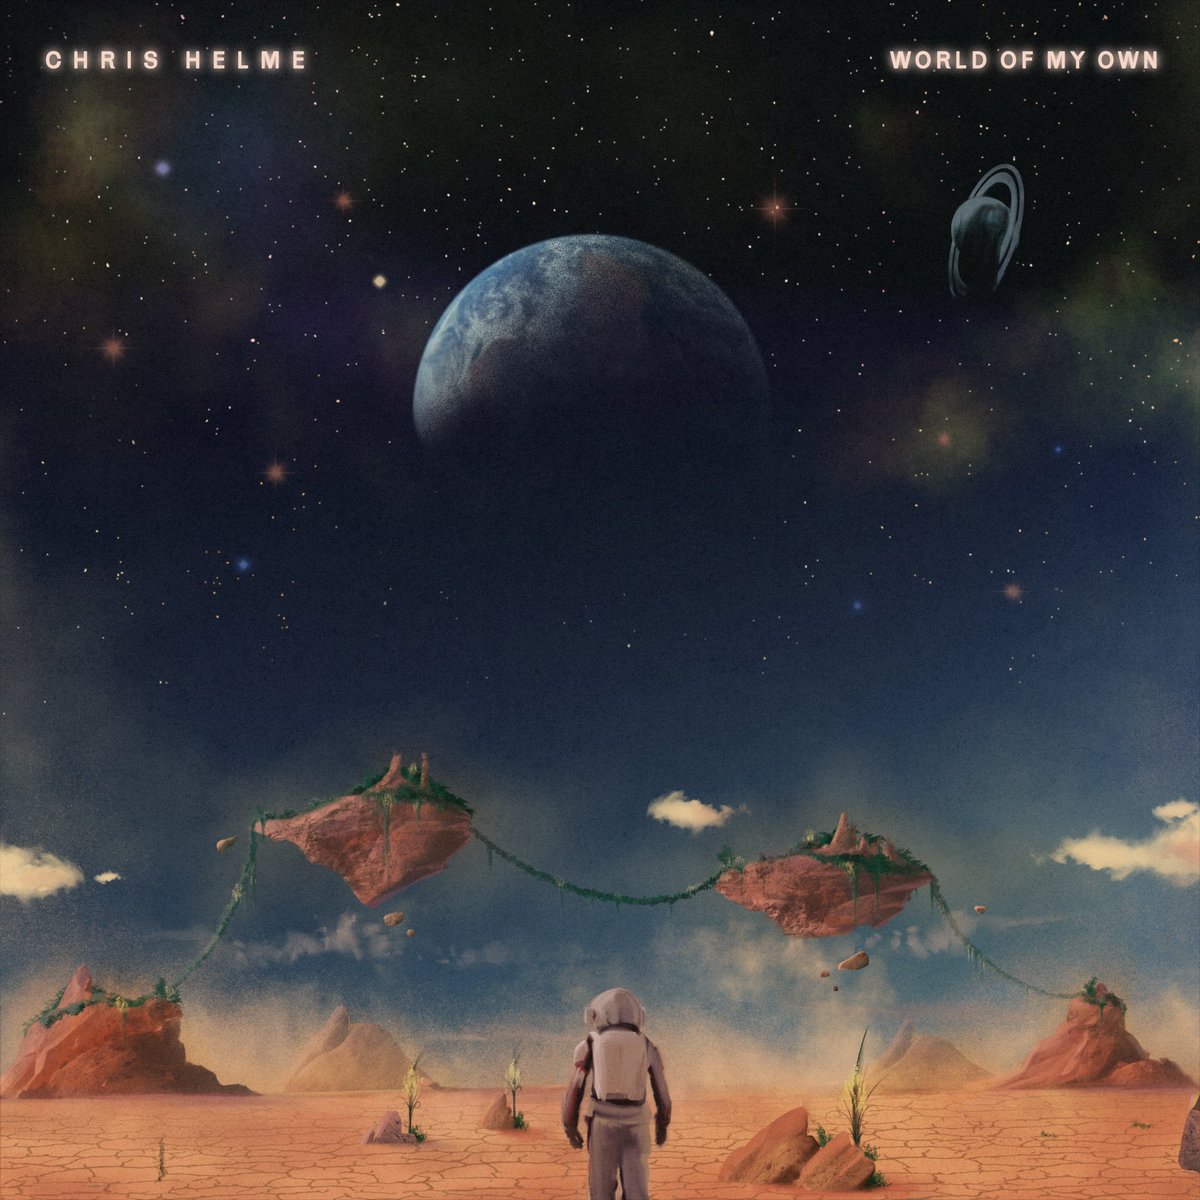 World Of My Own - ffm.to/chrishelme-wor…

Artwork by theseasicksailor

Personnel

Chris Helme - Vocals, Acoustic & Electric Guitar, Percussion
Chris Farrell - Electric & Acoustic Guitars
Jon Hargreaves - Piano, Synths, Mellotron, Percussion, String Arrangements